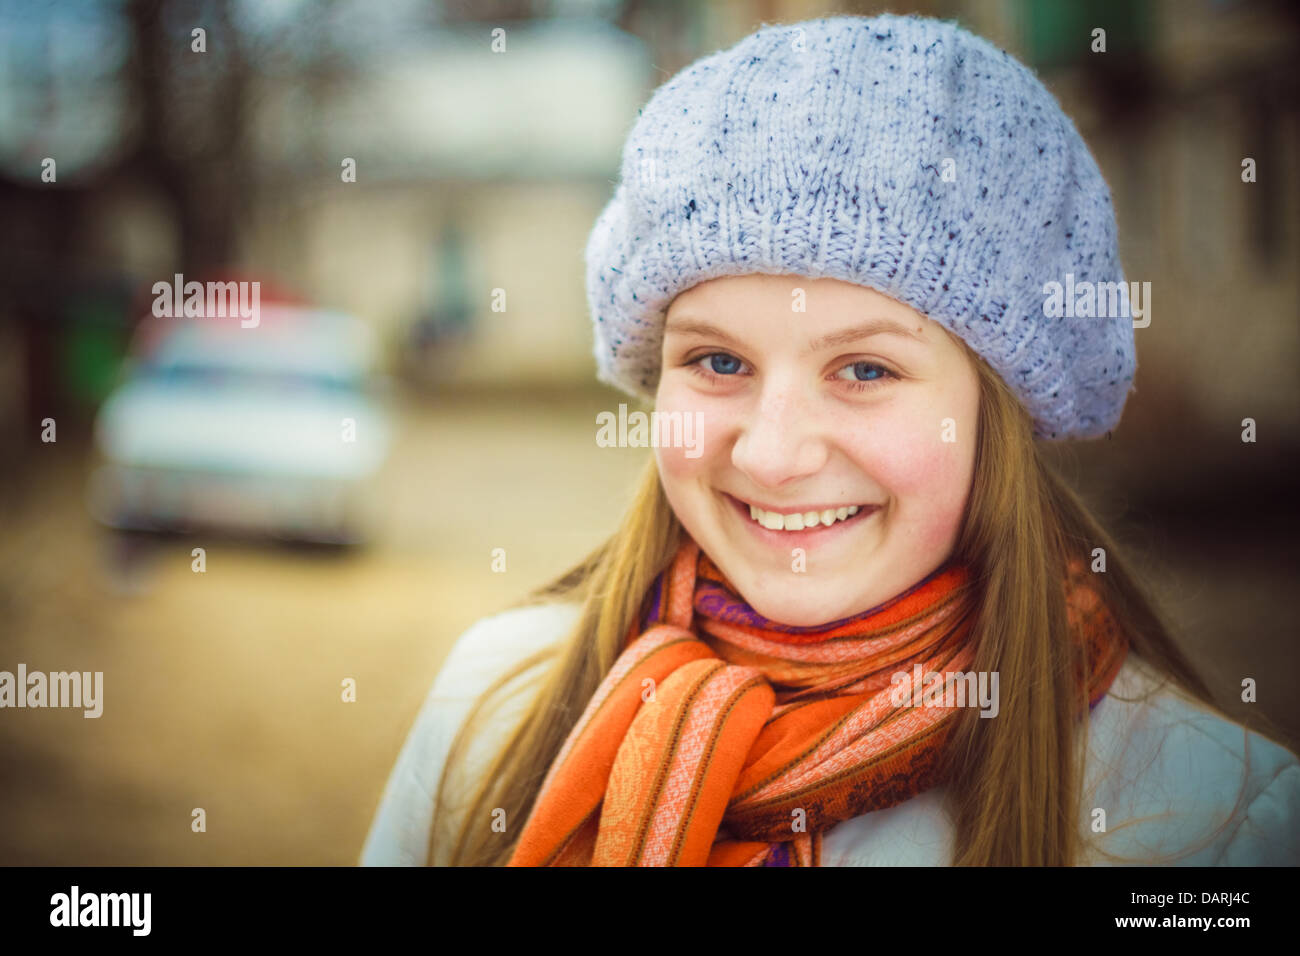 Teen Girl Wearing White Beret And Orange Scarf In Windy Day Stock Photo ...